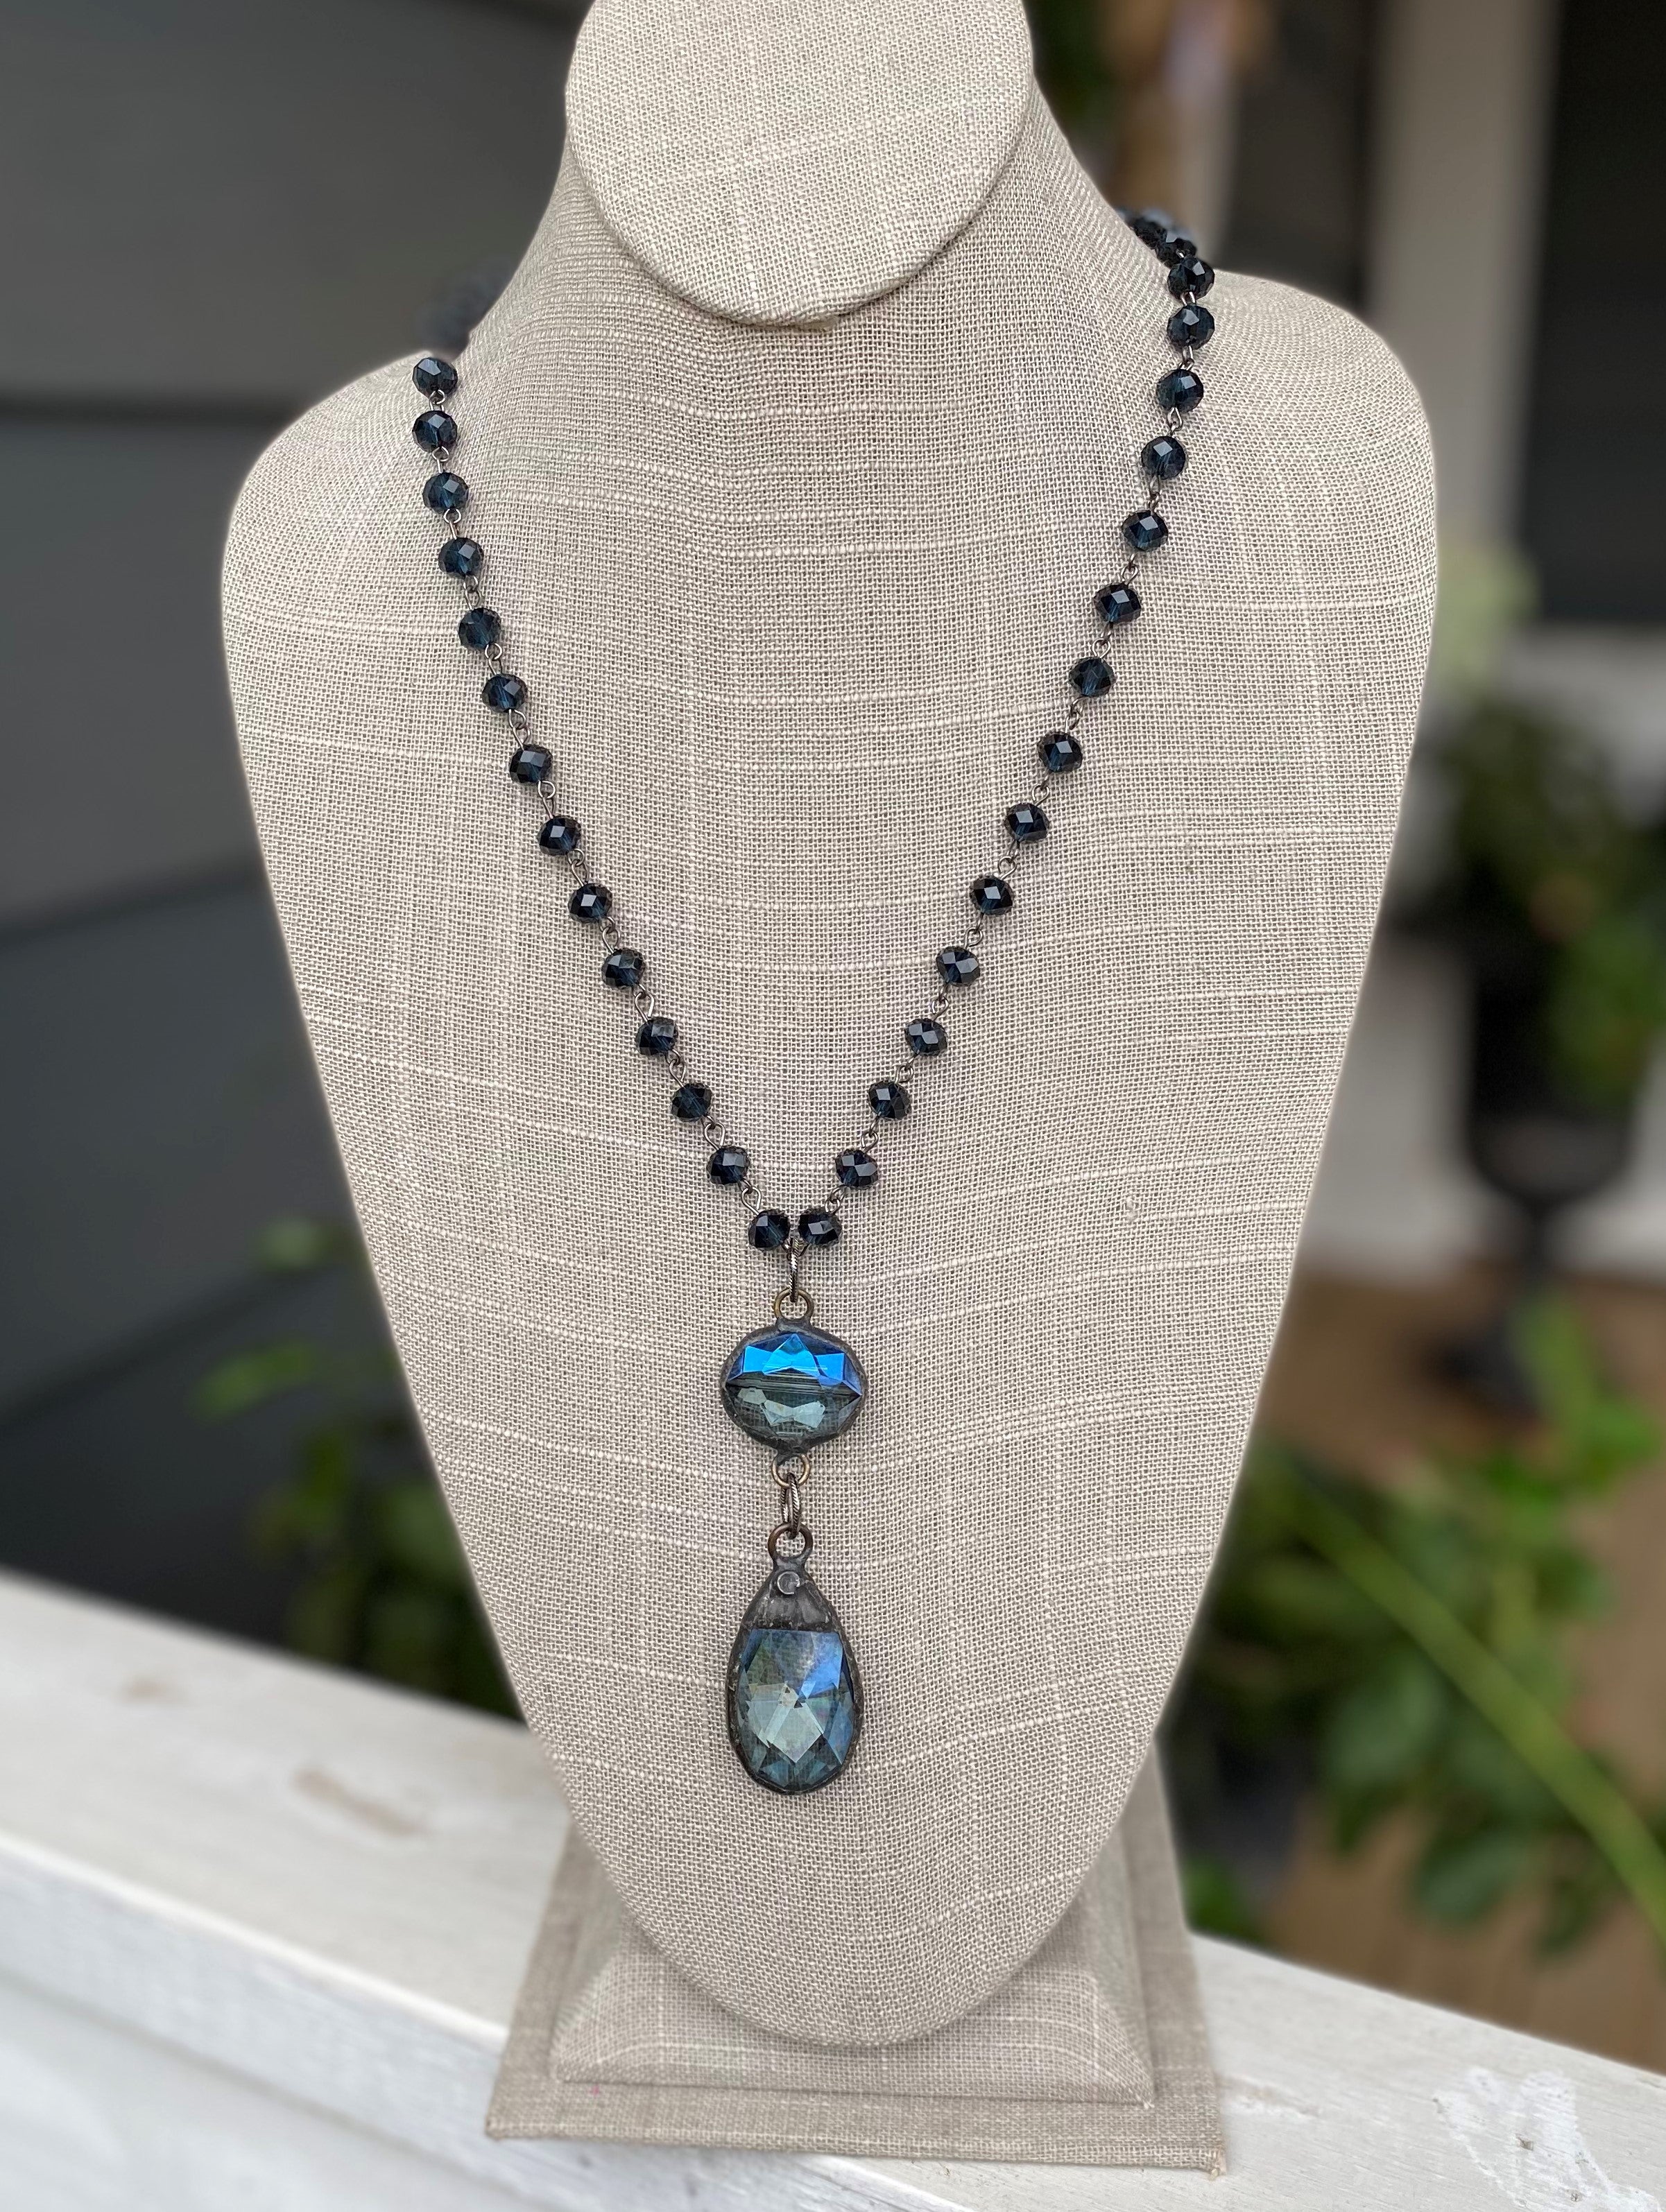 Double Drop Necklace with Large Crystal Teardrop